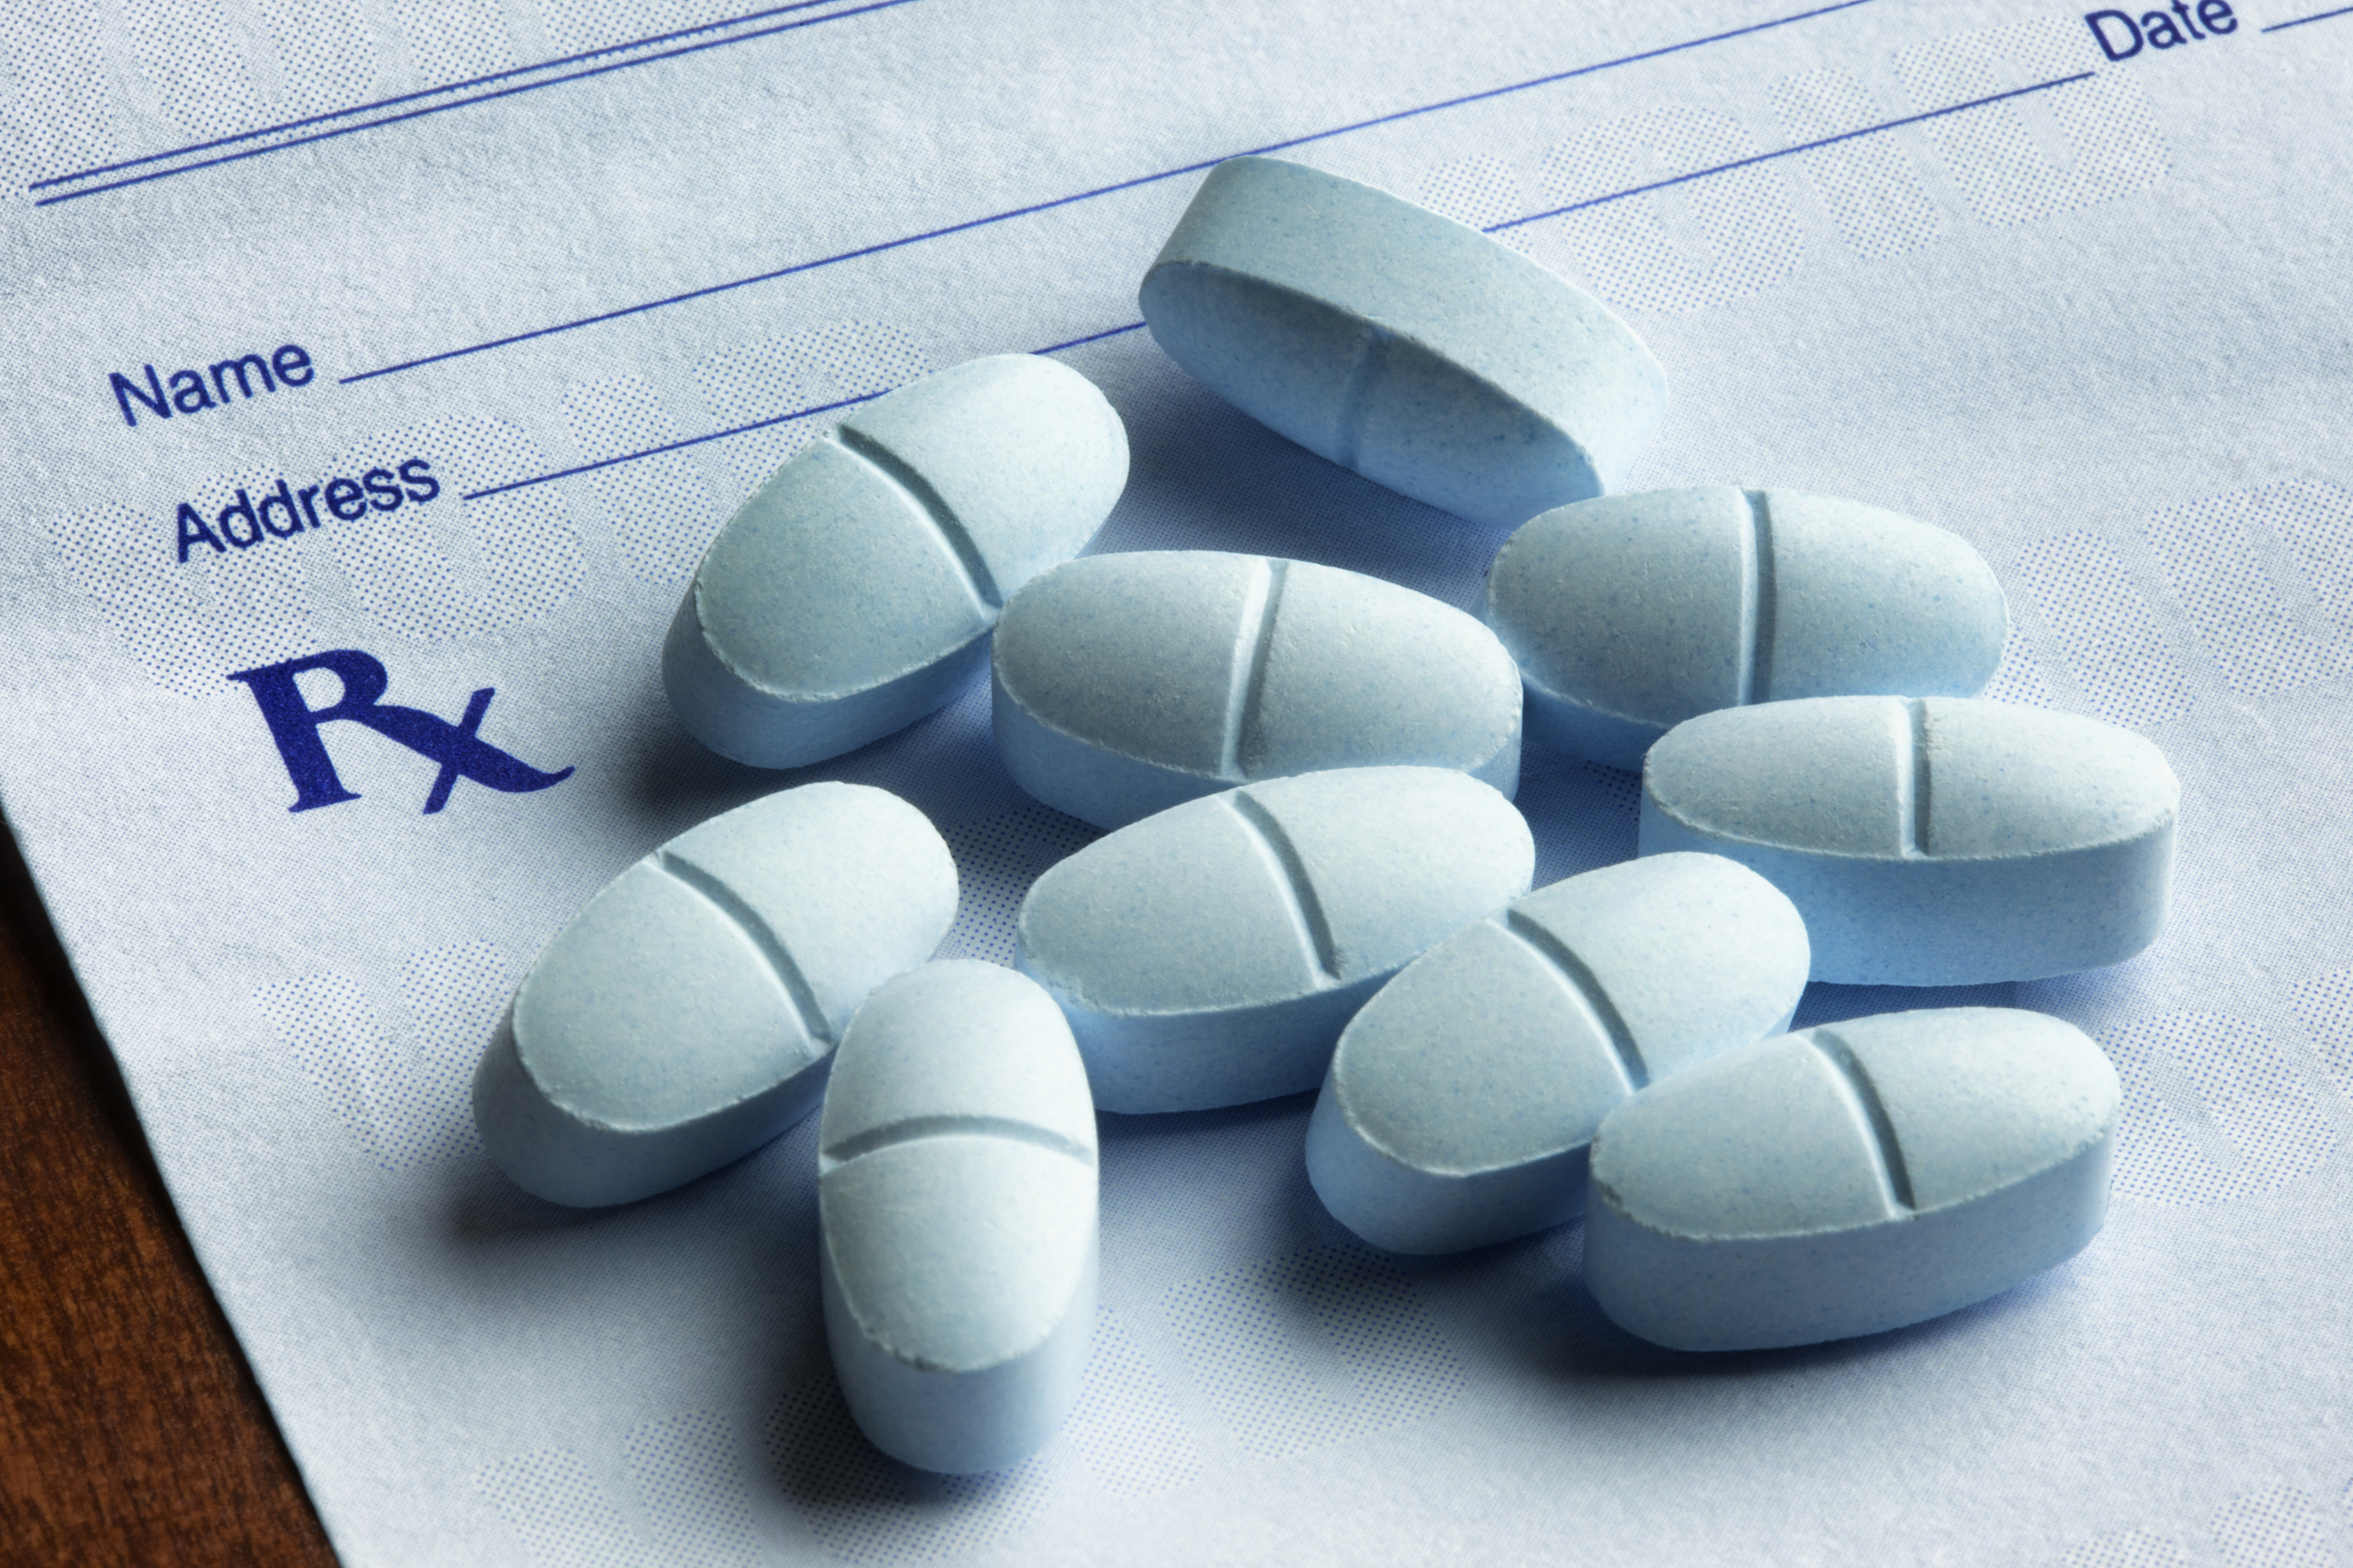 CASE STUDY: Patient Overdoses and Dies After Inappropriate Opioid Prescribing